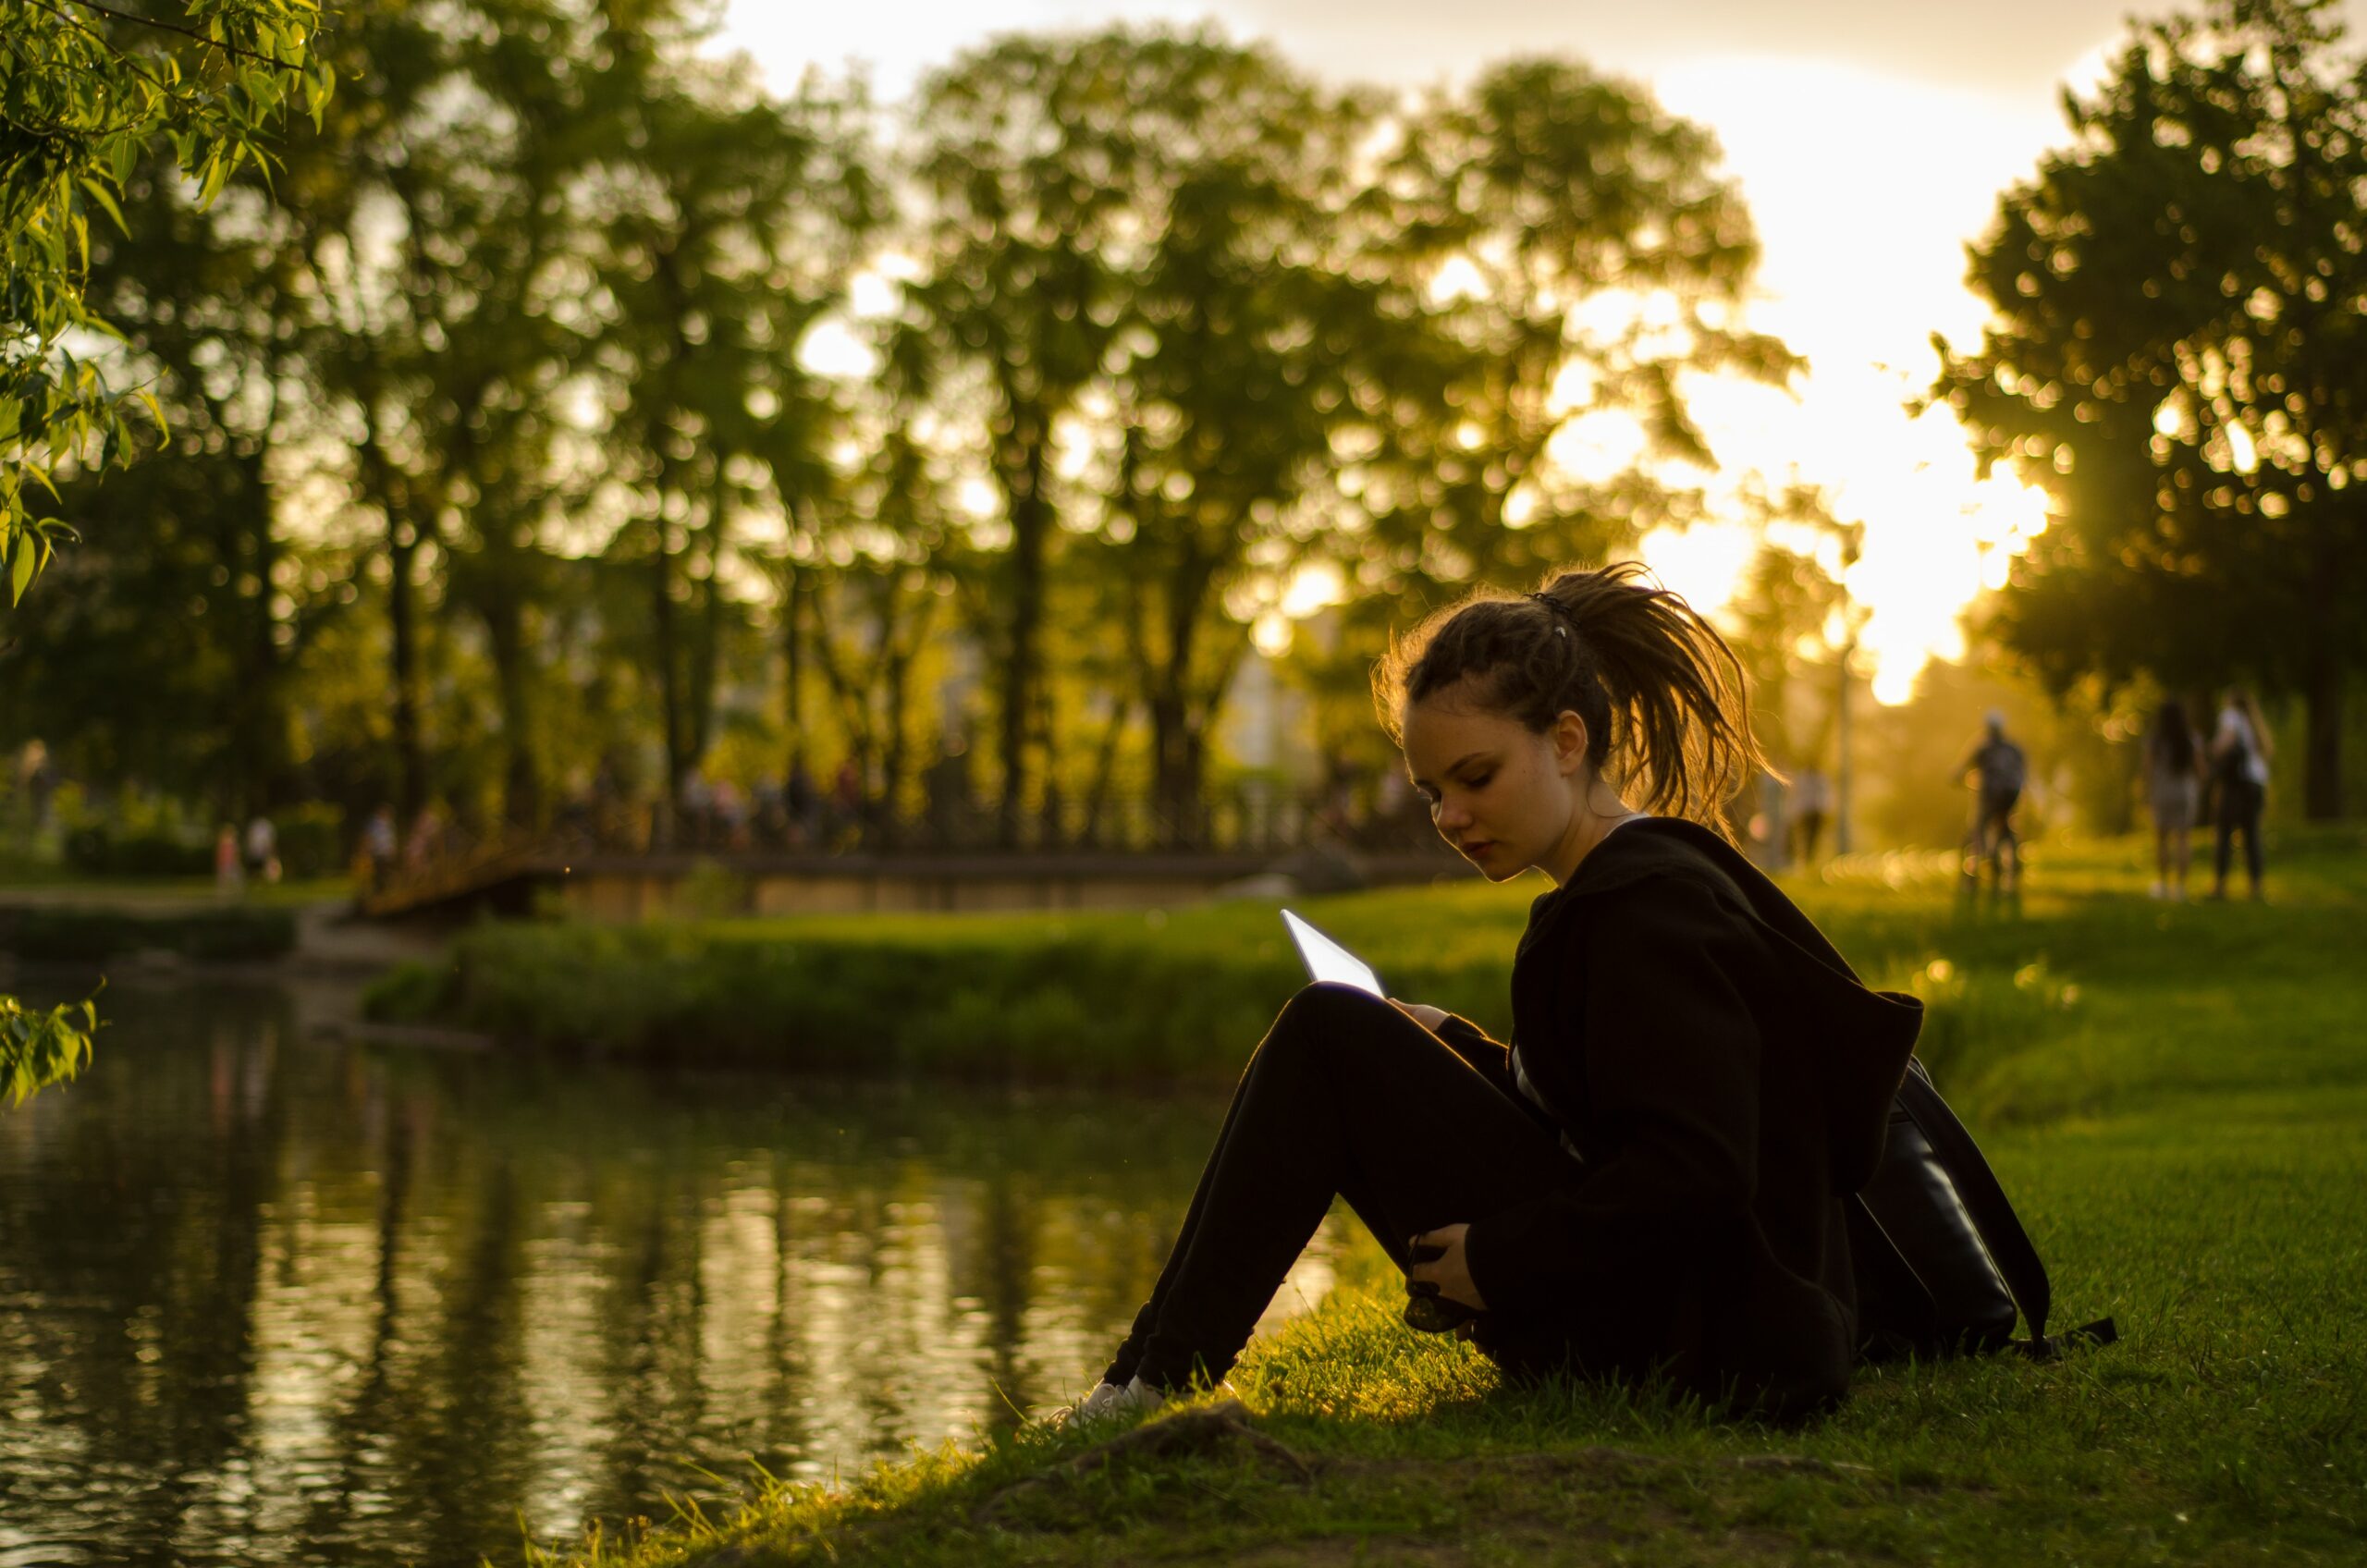 woman sitting on grass field beside body of water during golden hour